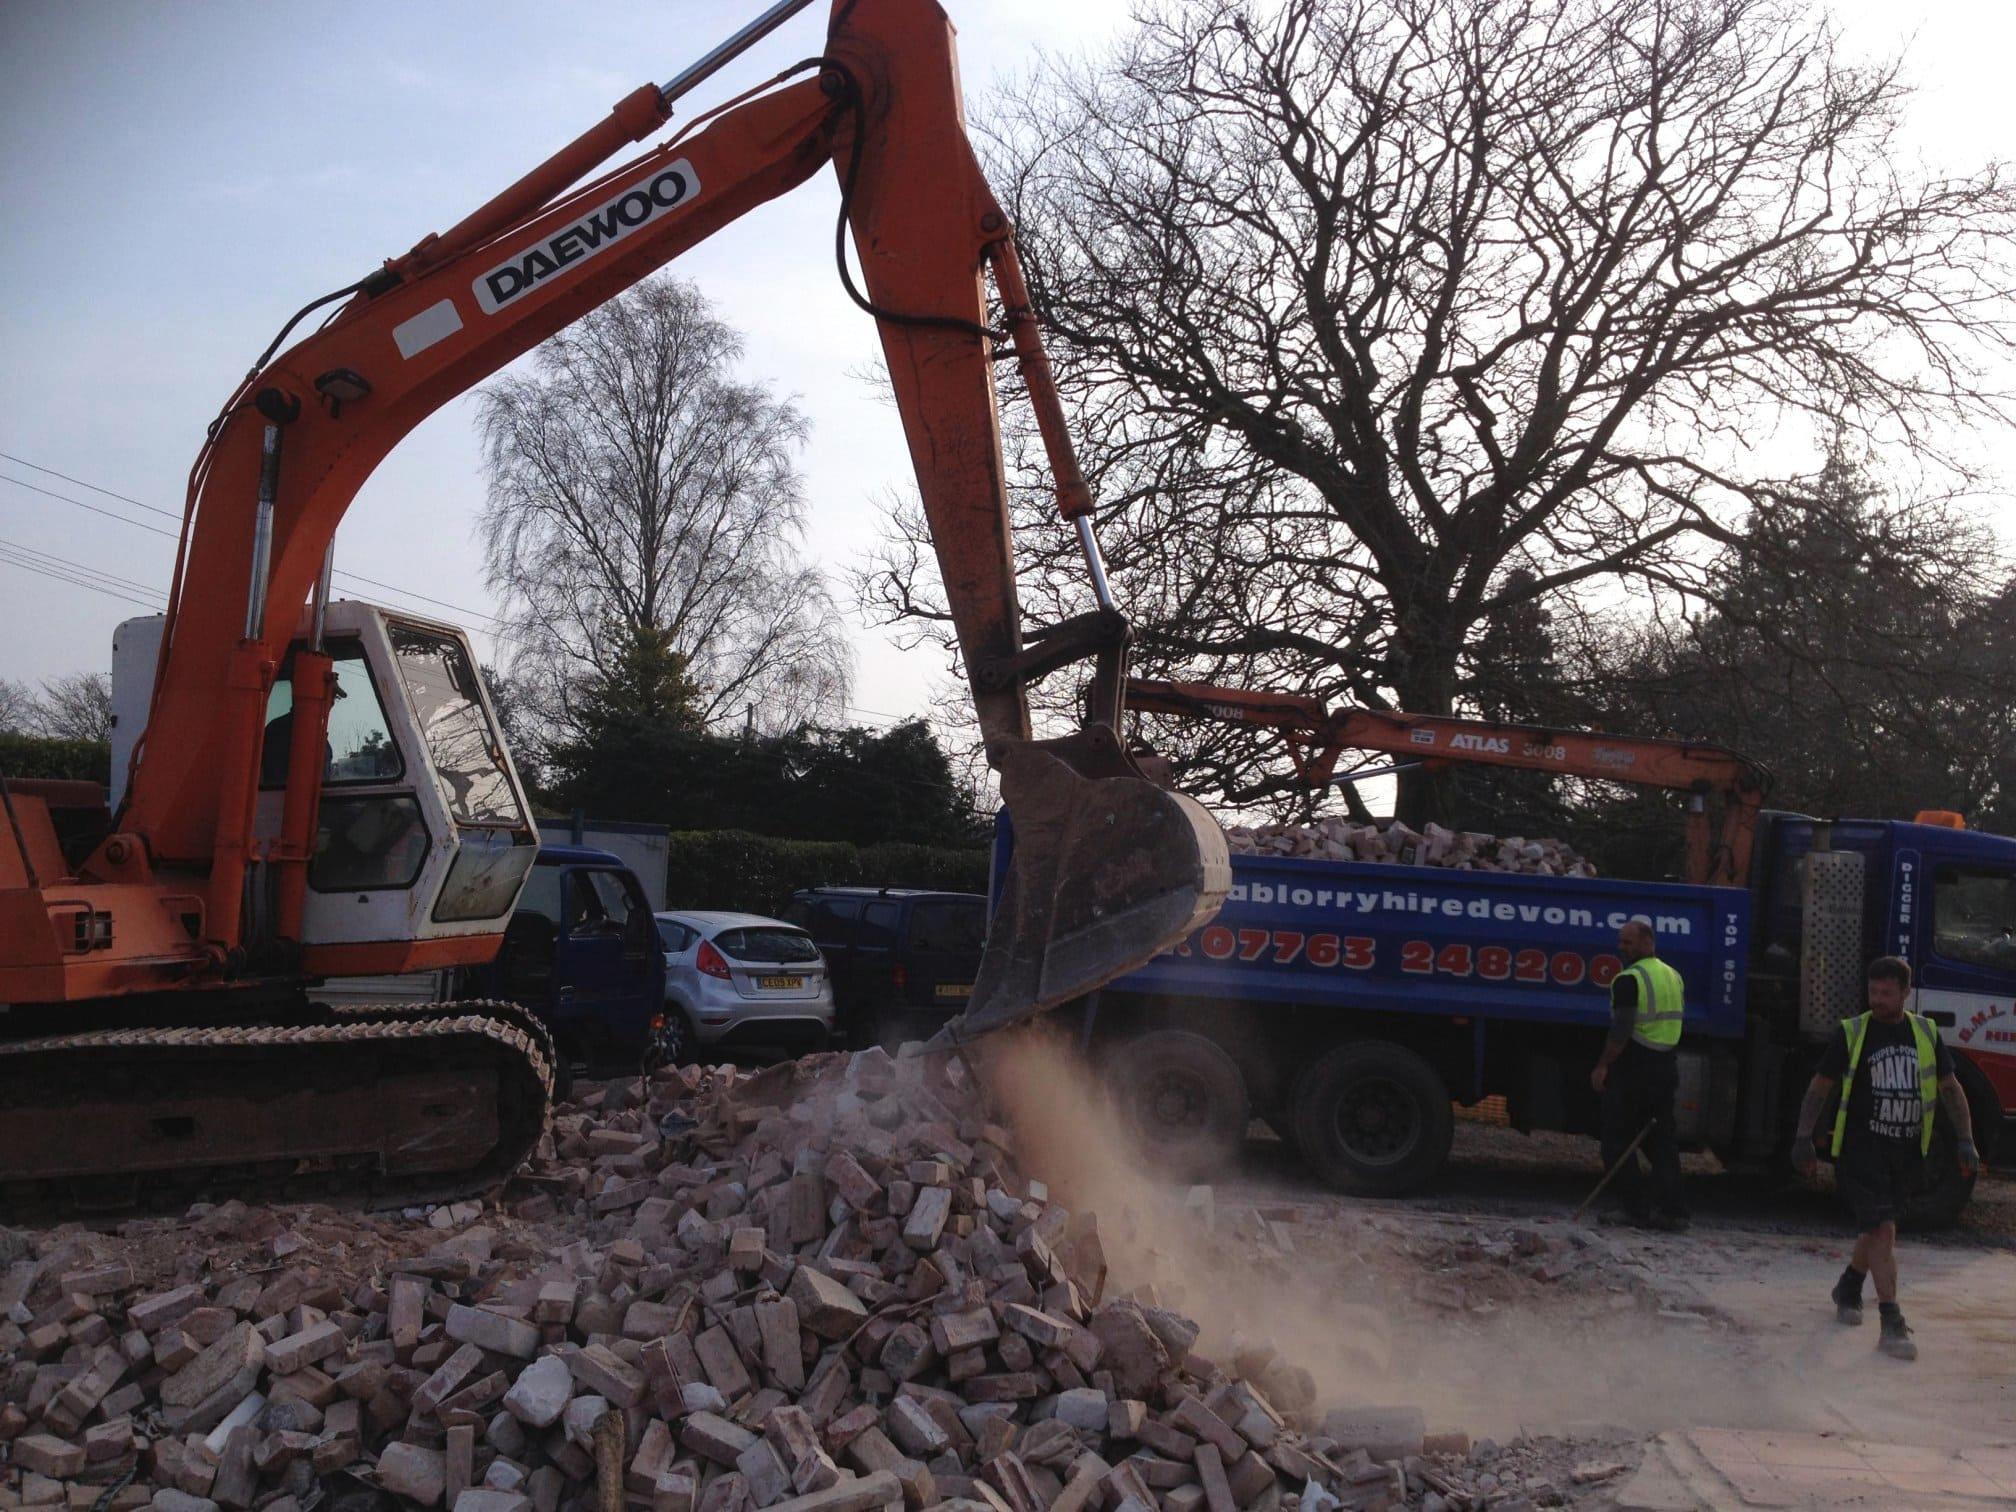 G M L Grab Services Groundworks & Excavations Exeter 07763 248200